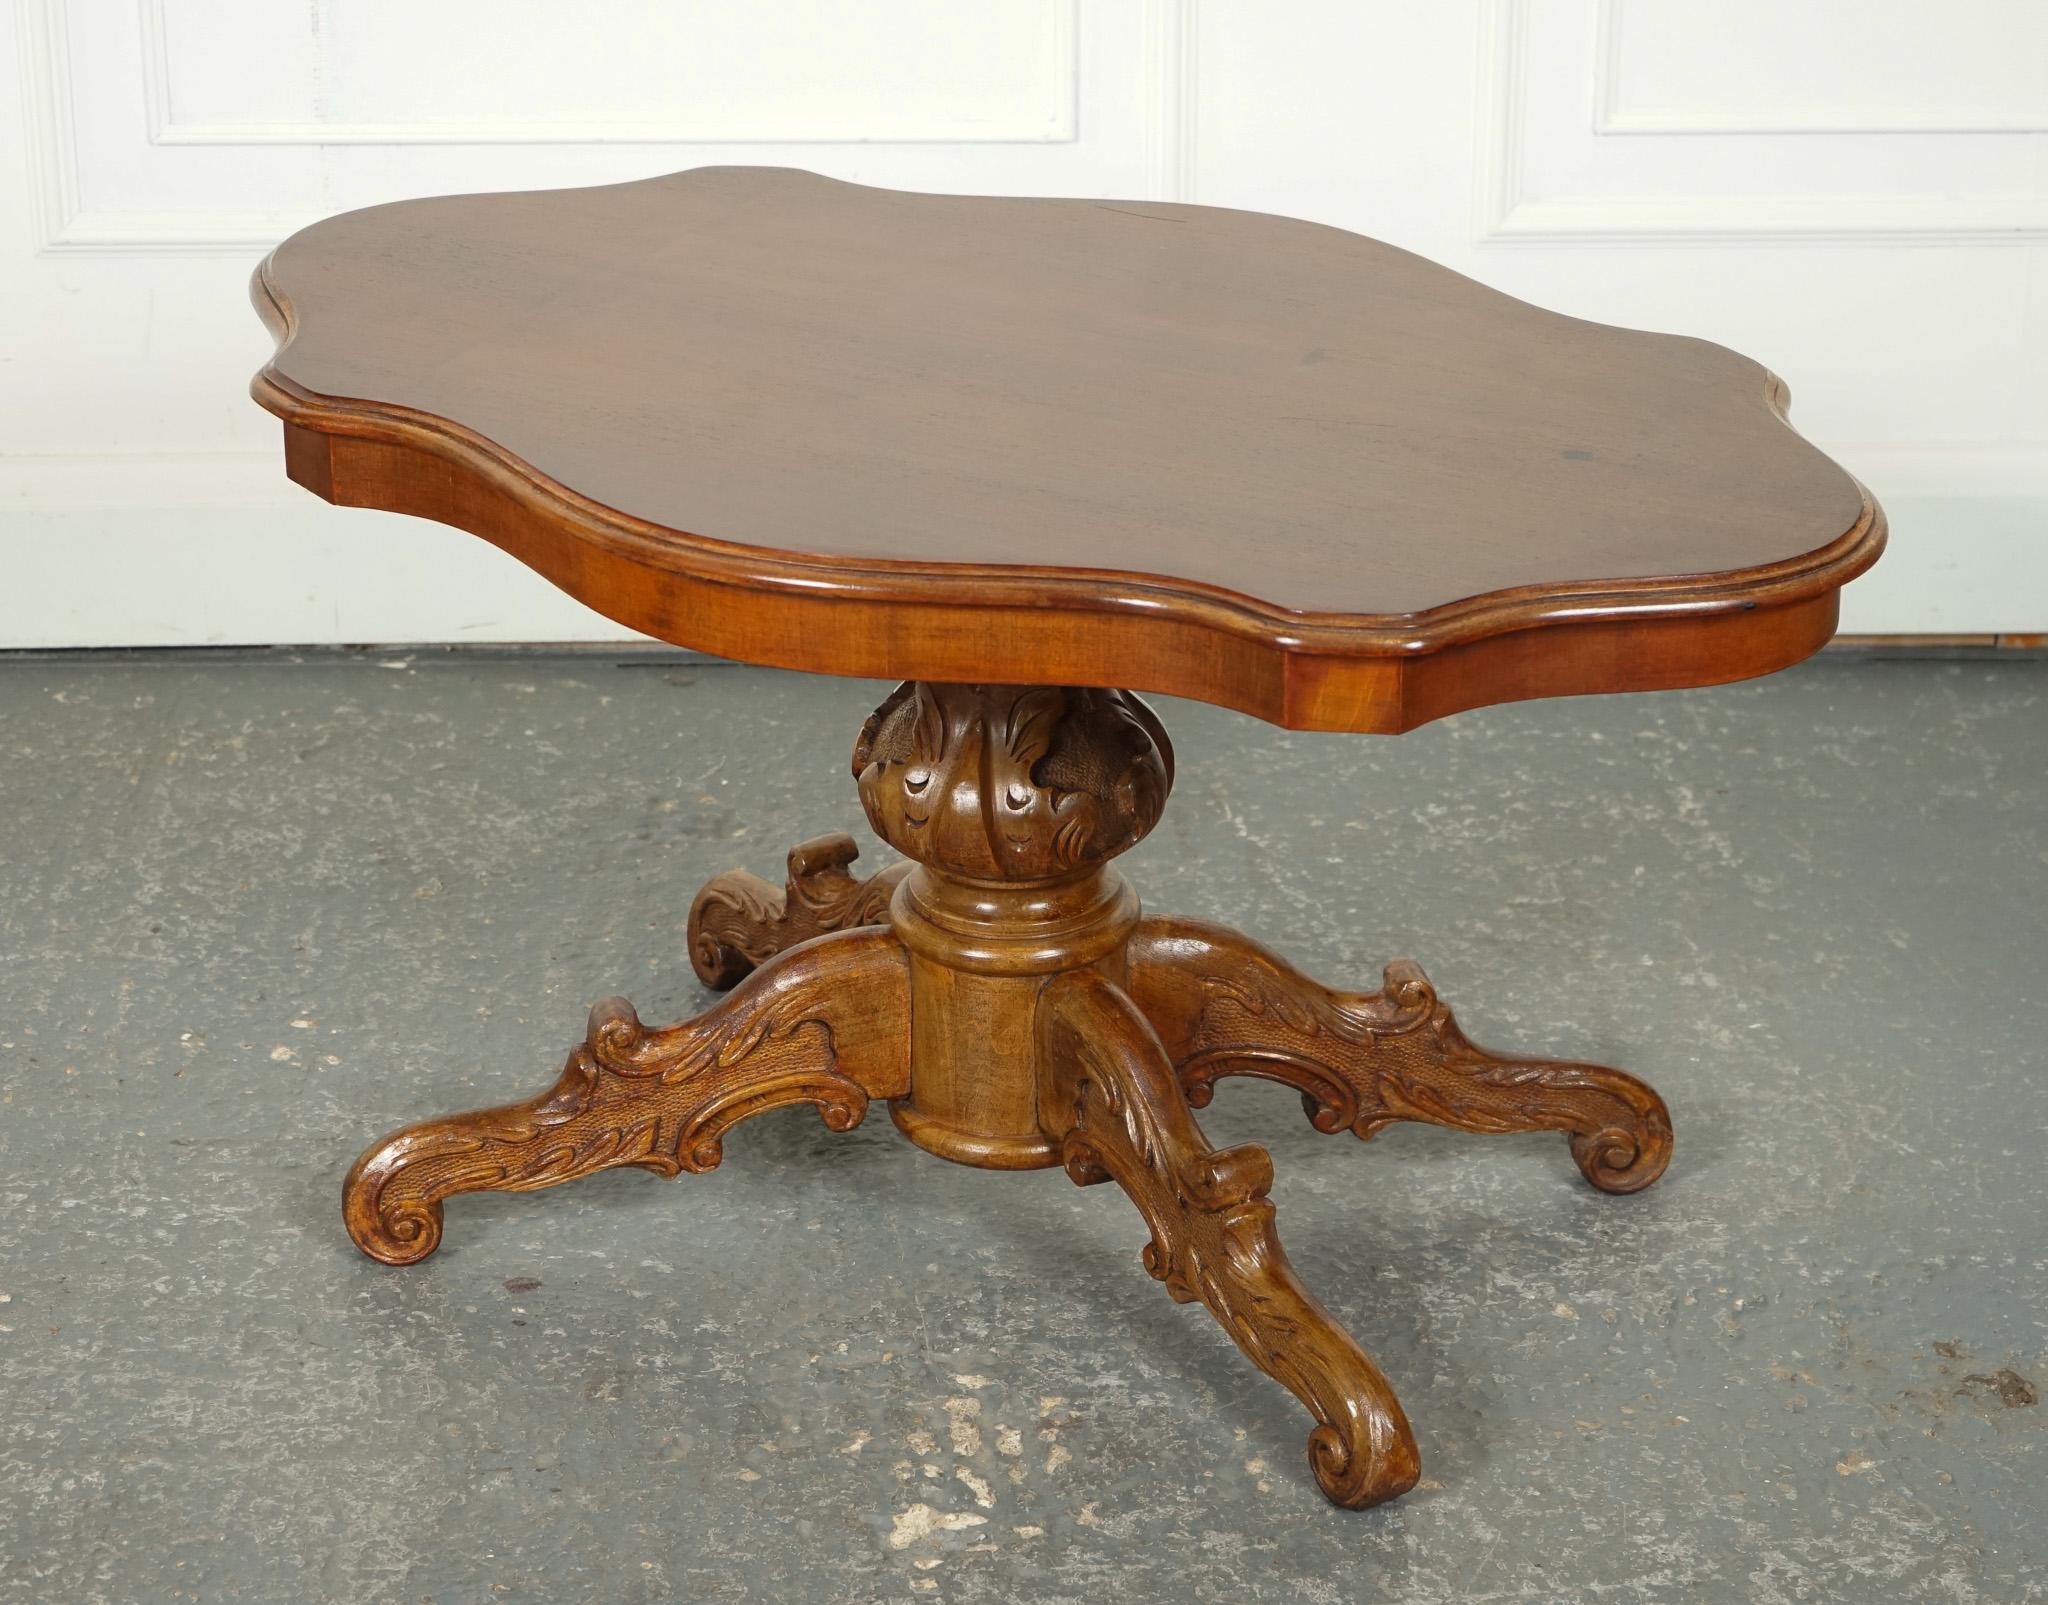 

We are delighted to offer for sale this Vintage Italian Walnut Baroque Coffee Table.

A vintage Italian walnut Baroque coffee table is a stunning and piece of furniture inspired by the opulent Baroque style popular in Italy during the 17th and